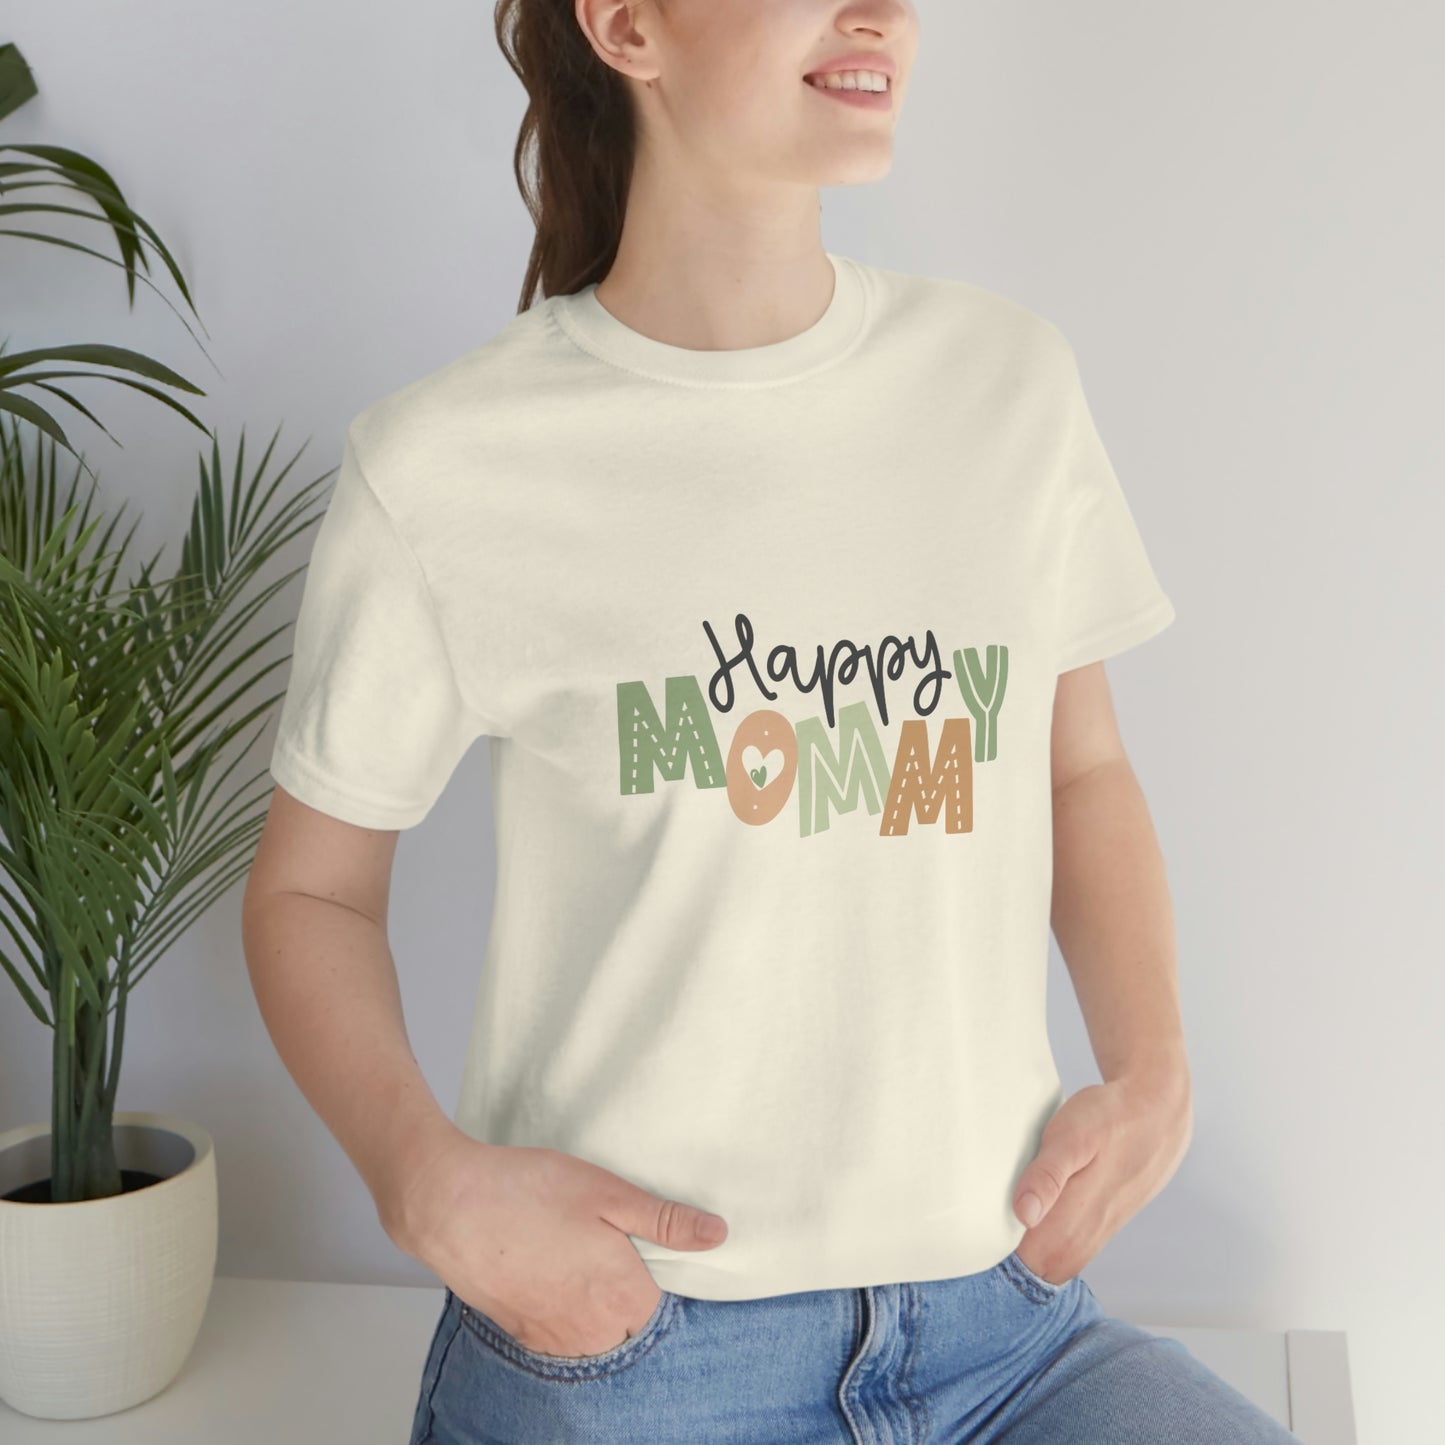 Show your mom you care with the Happy Mommy natural colored T-shirt! The perfect gift for mom!